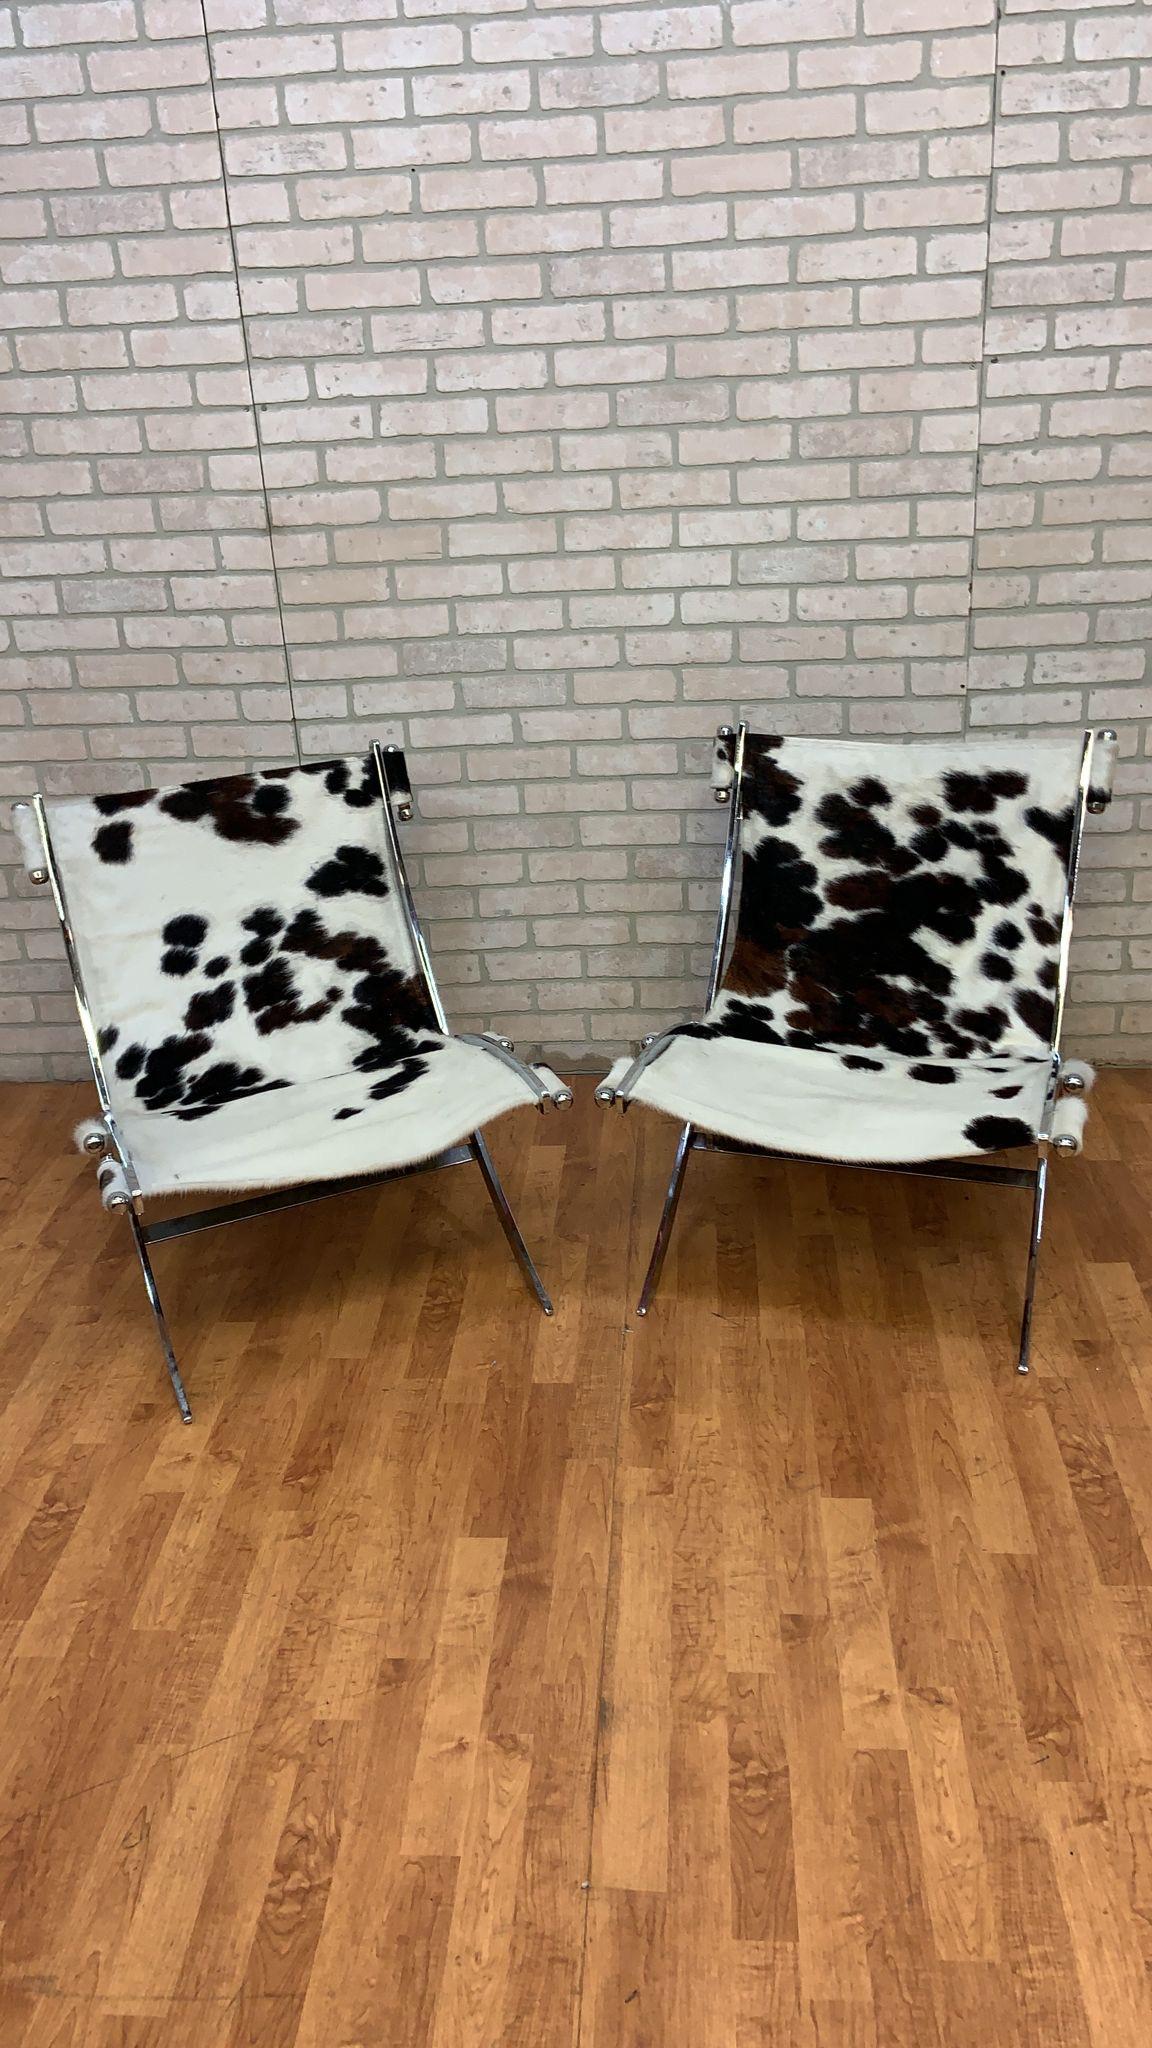 Mid Century Modern Antonio Citterio  ”Timeless” Lounge Scissor Chairs for Flexform Newly Upholstered in a Black and White Cowhide - Pair

This exceptional pair of “Timeless” classic mid century modern chairs by Antonio Citterio for Flexform are not